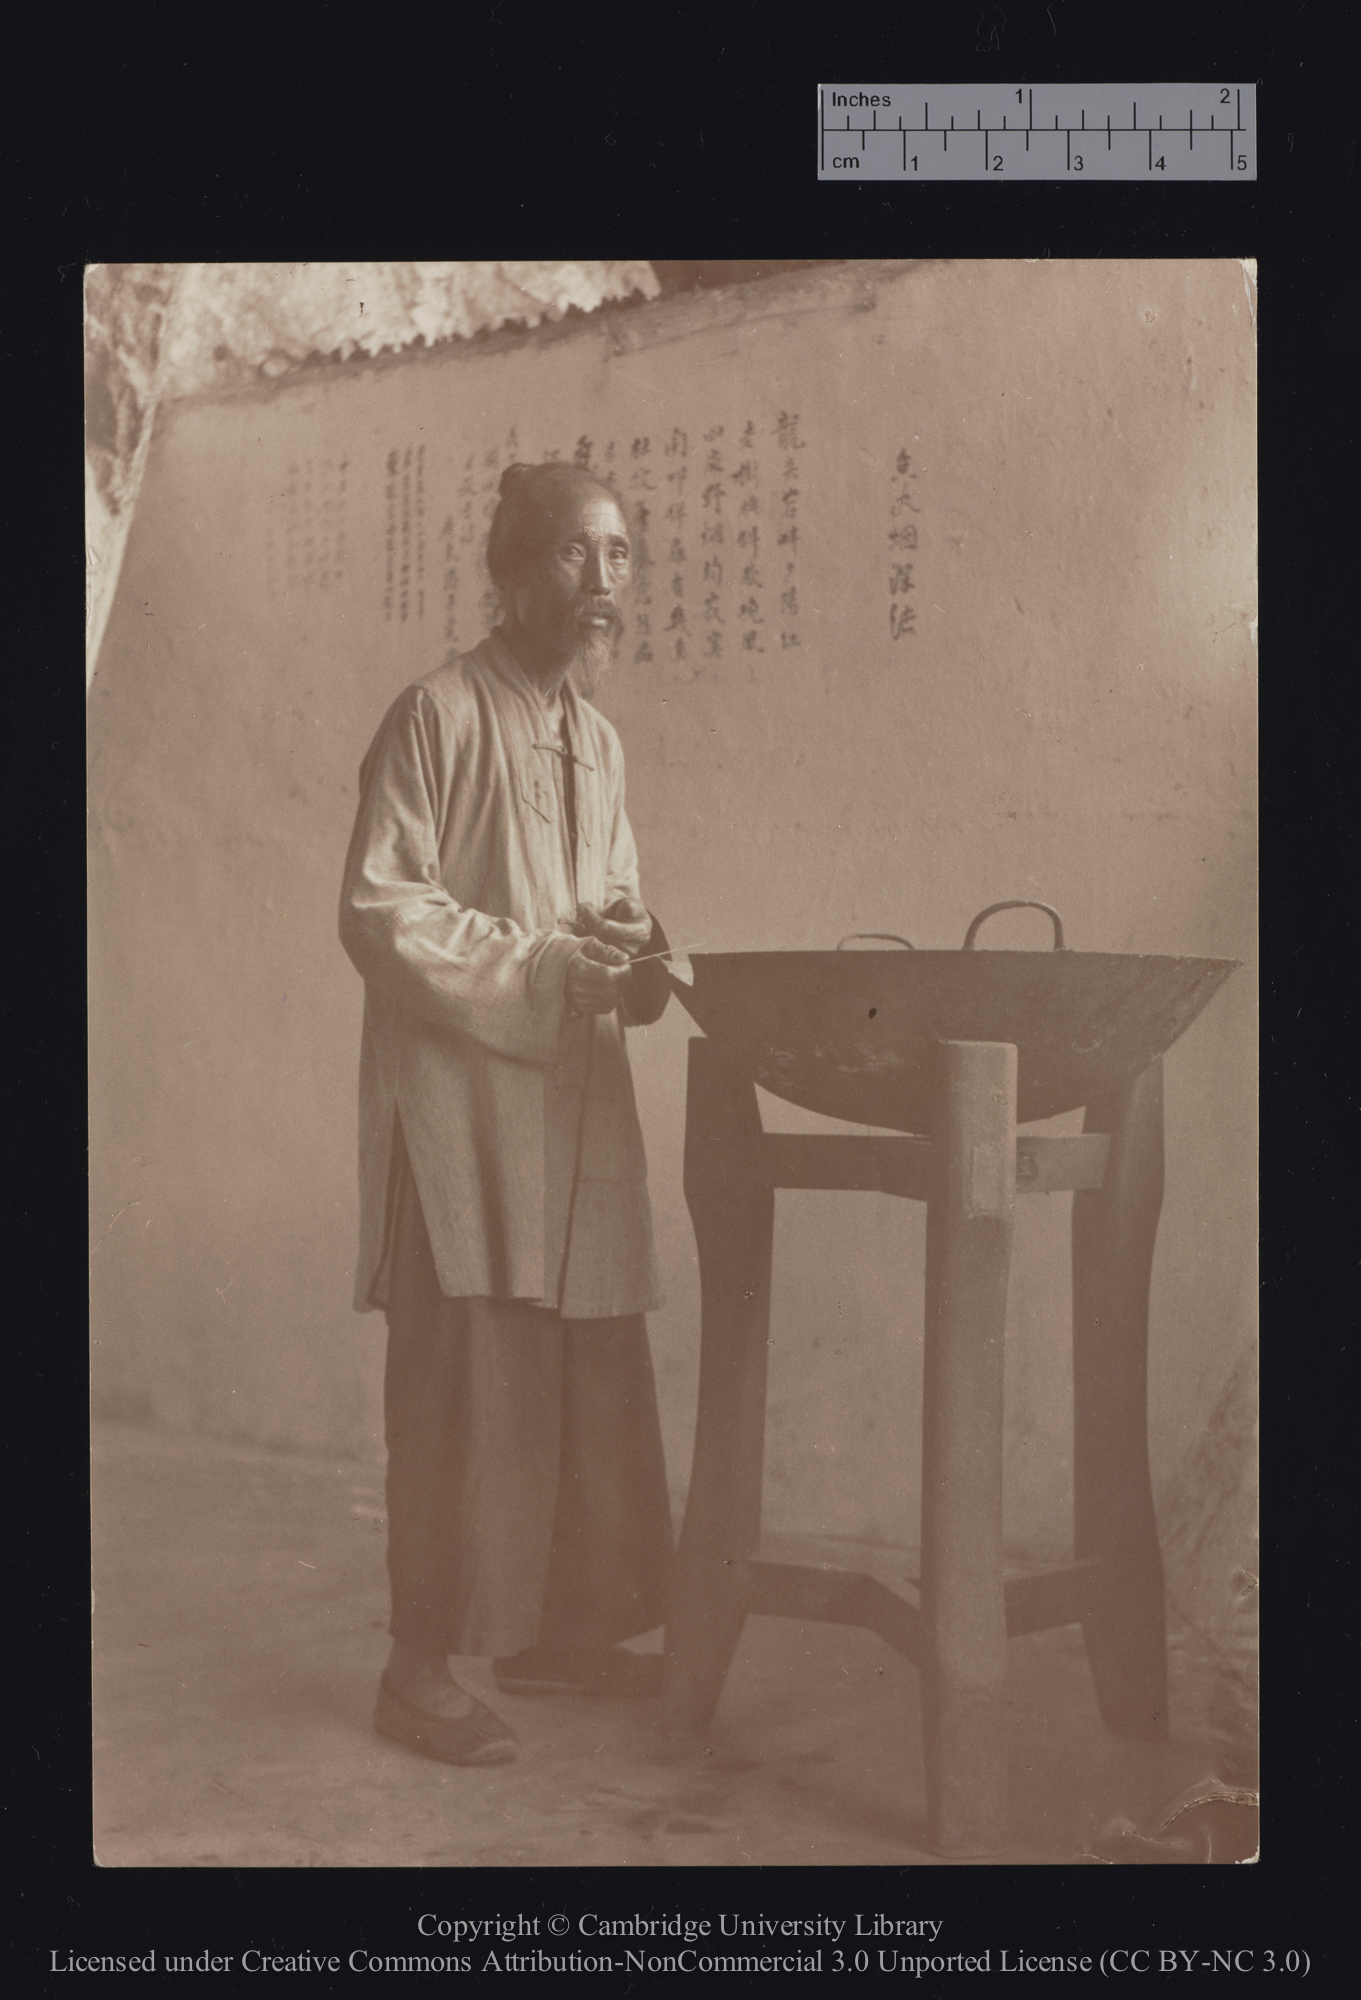 In a Buddhist temple, 1910 - 1929